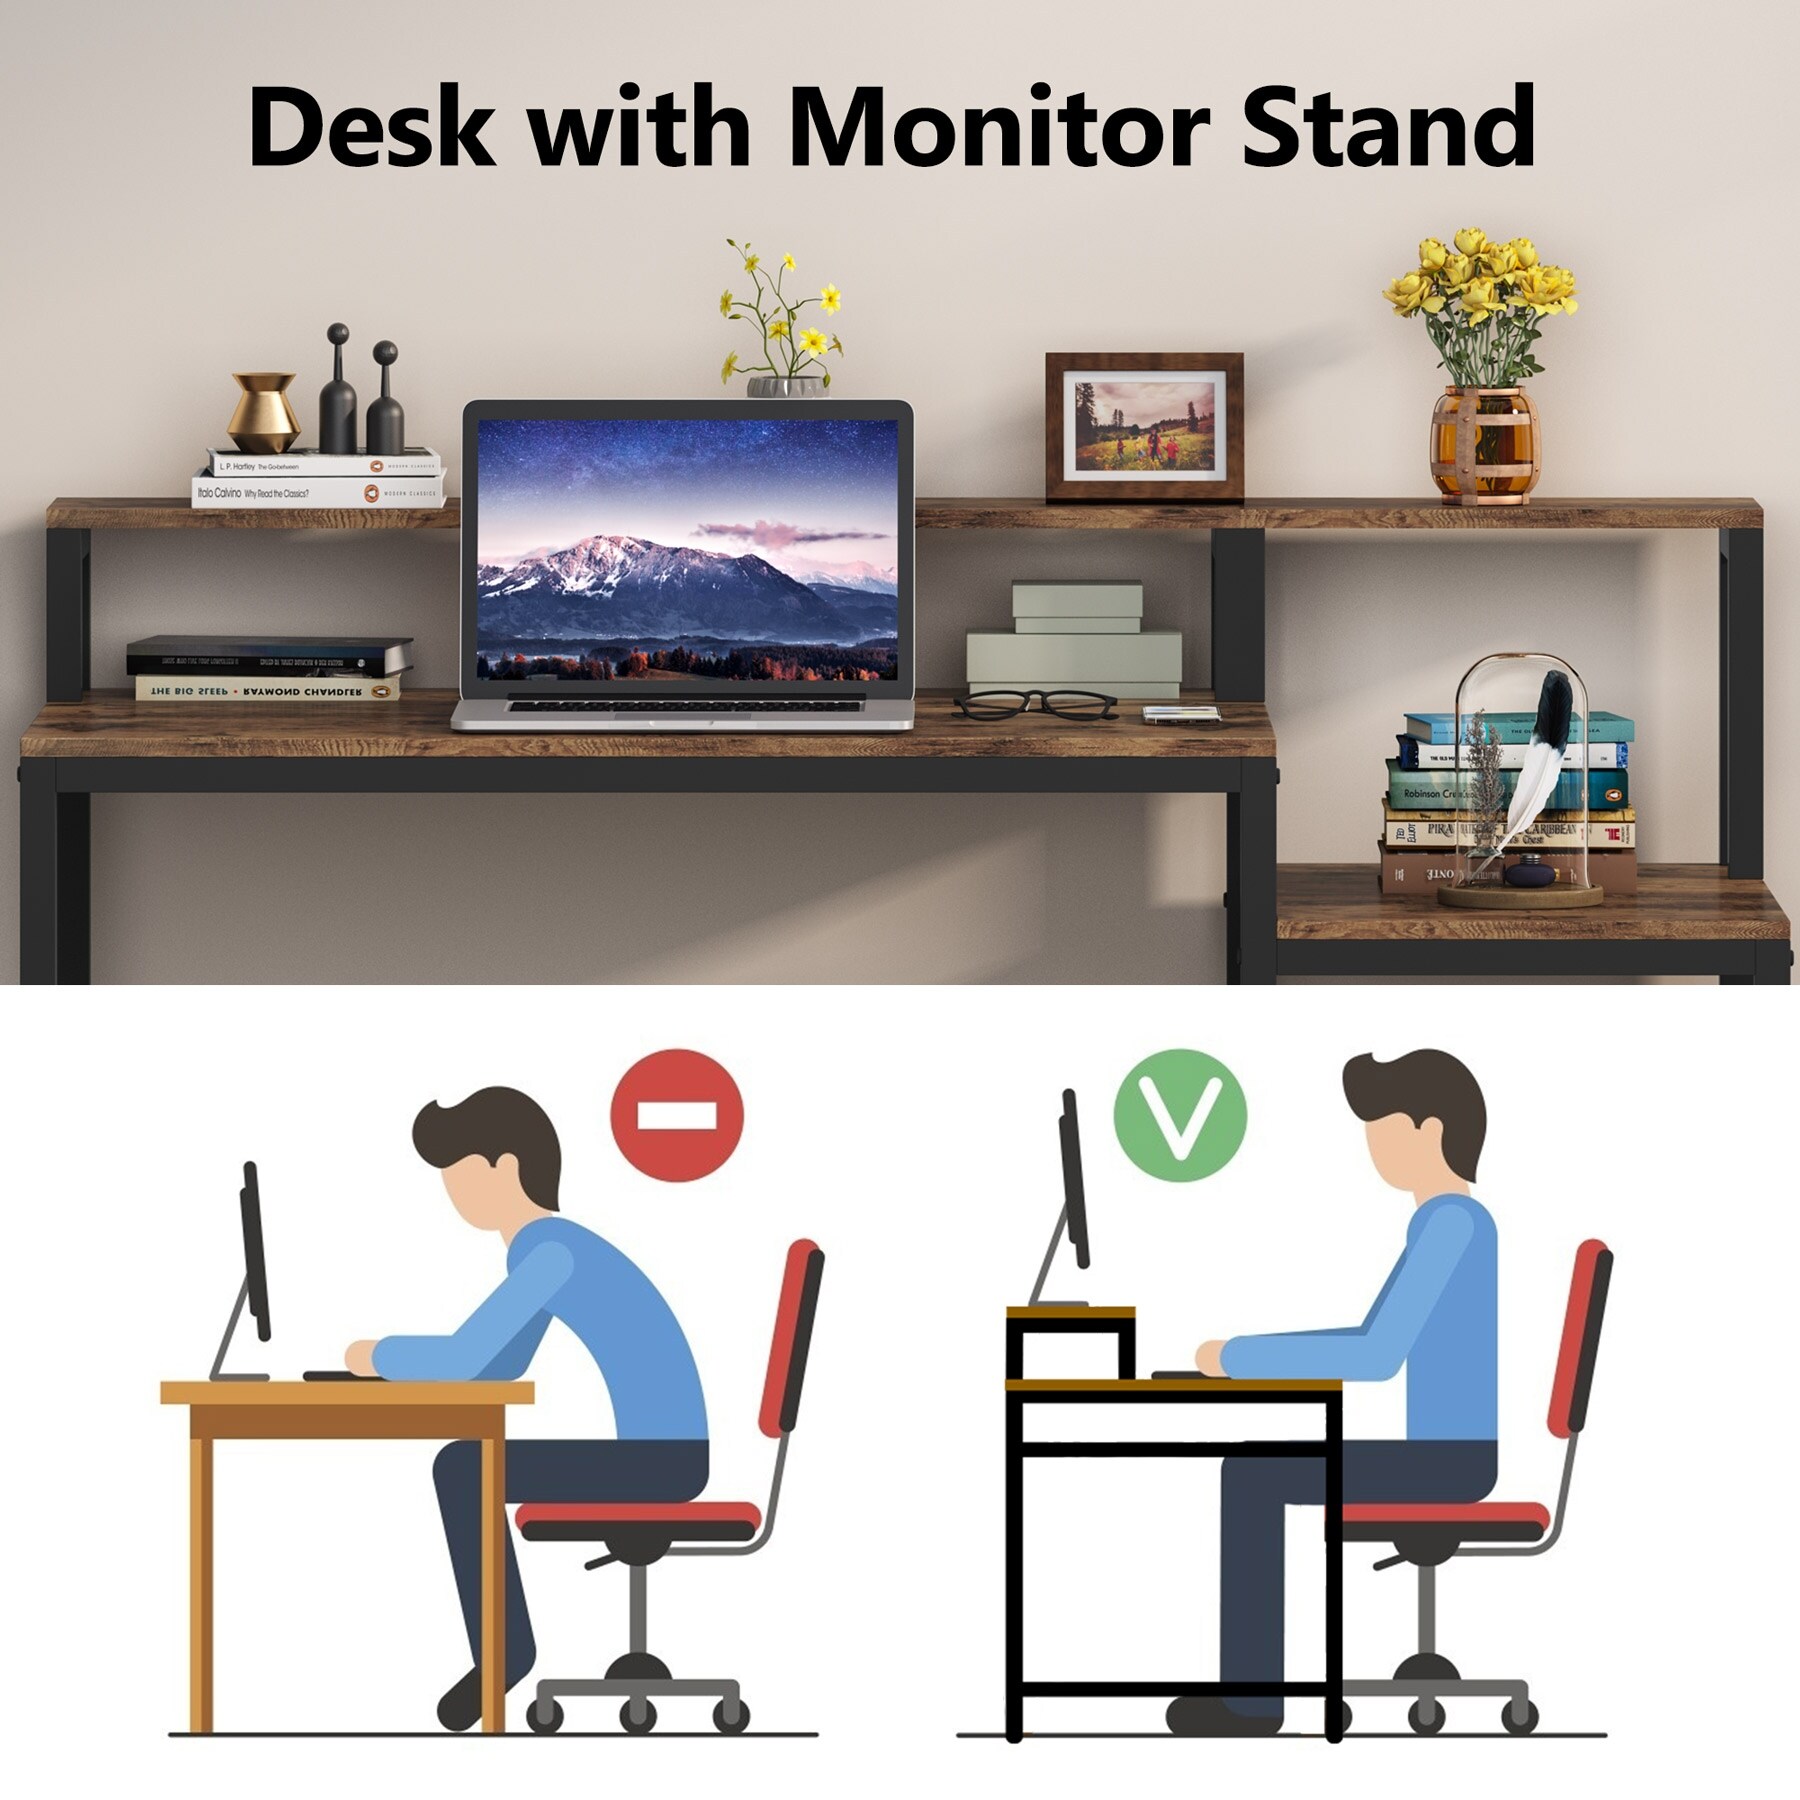 https://ak1.ostkcdn.com/images/products/is/images/direct/f253e6f585a4b321c09a330b53170eff60db6651/59%27%27-Computer-Desk-with-Drawer%2C-Storage-Shelves-and-Monitor-Stand.jpg